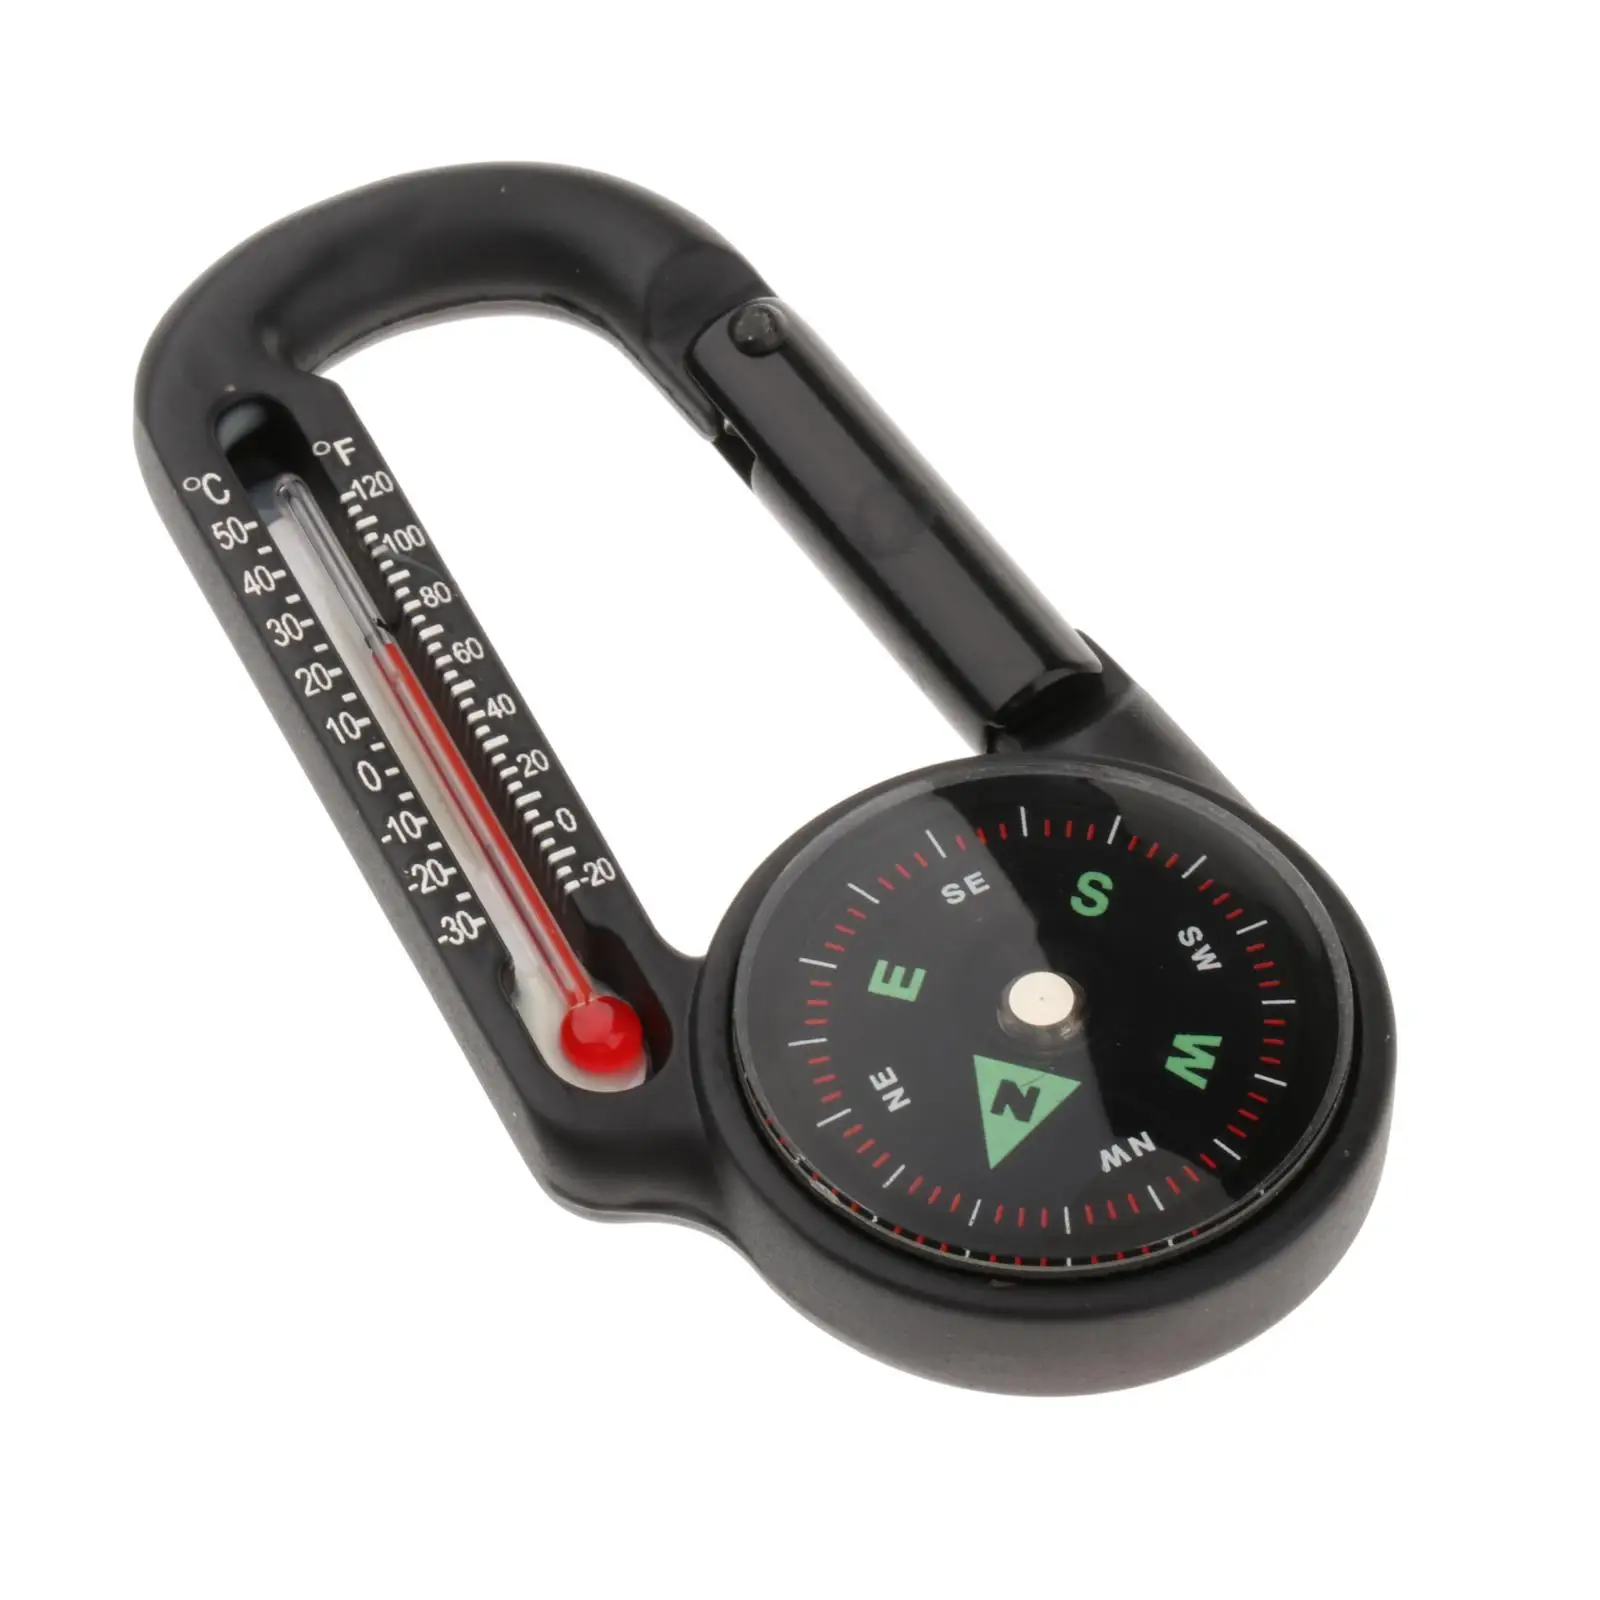 L49 3-in-1 Carabiner Key Ring KeyChain Compass & Thermometer for Hiking Travel 